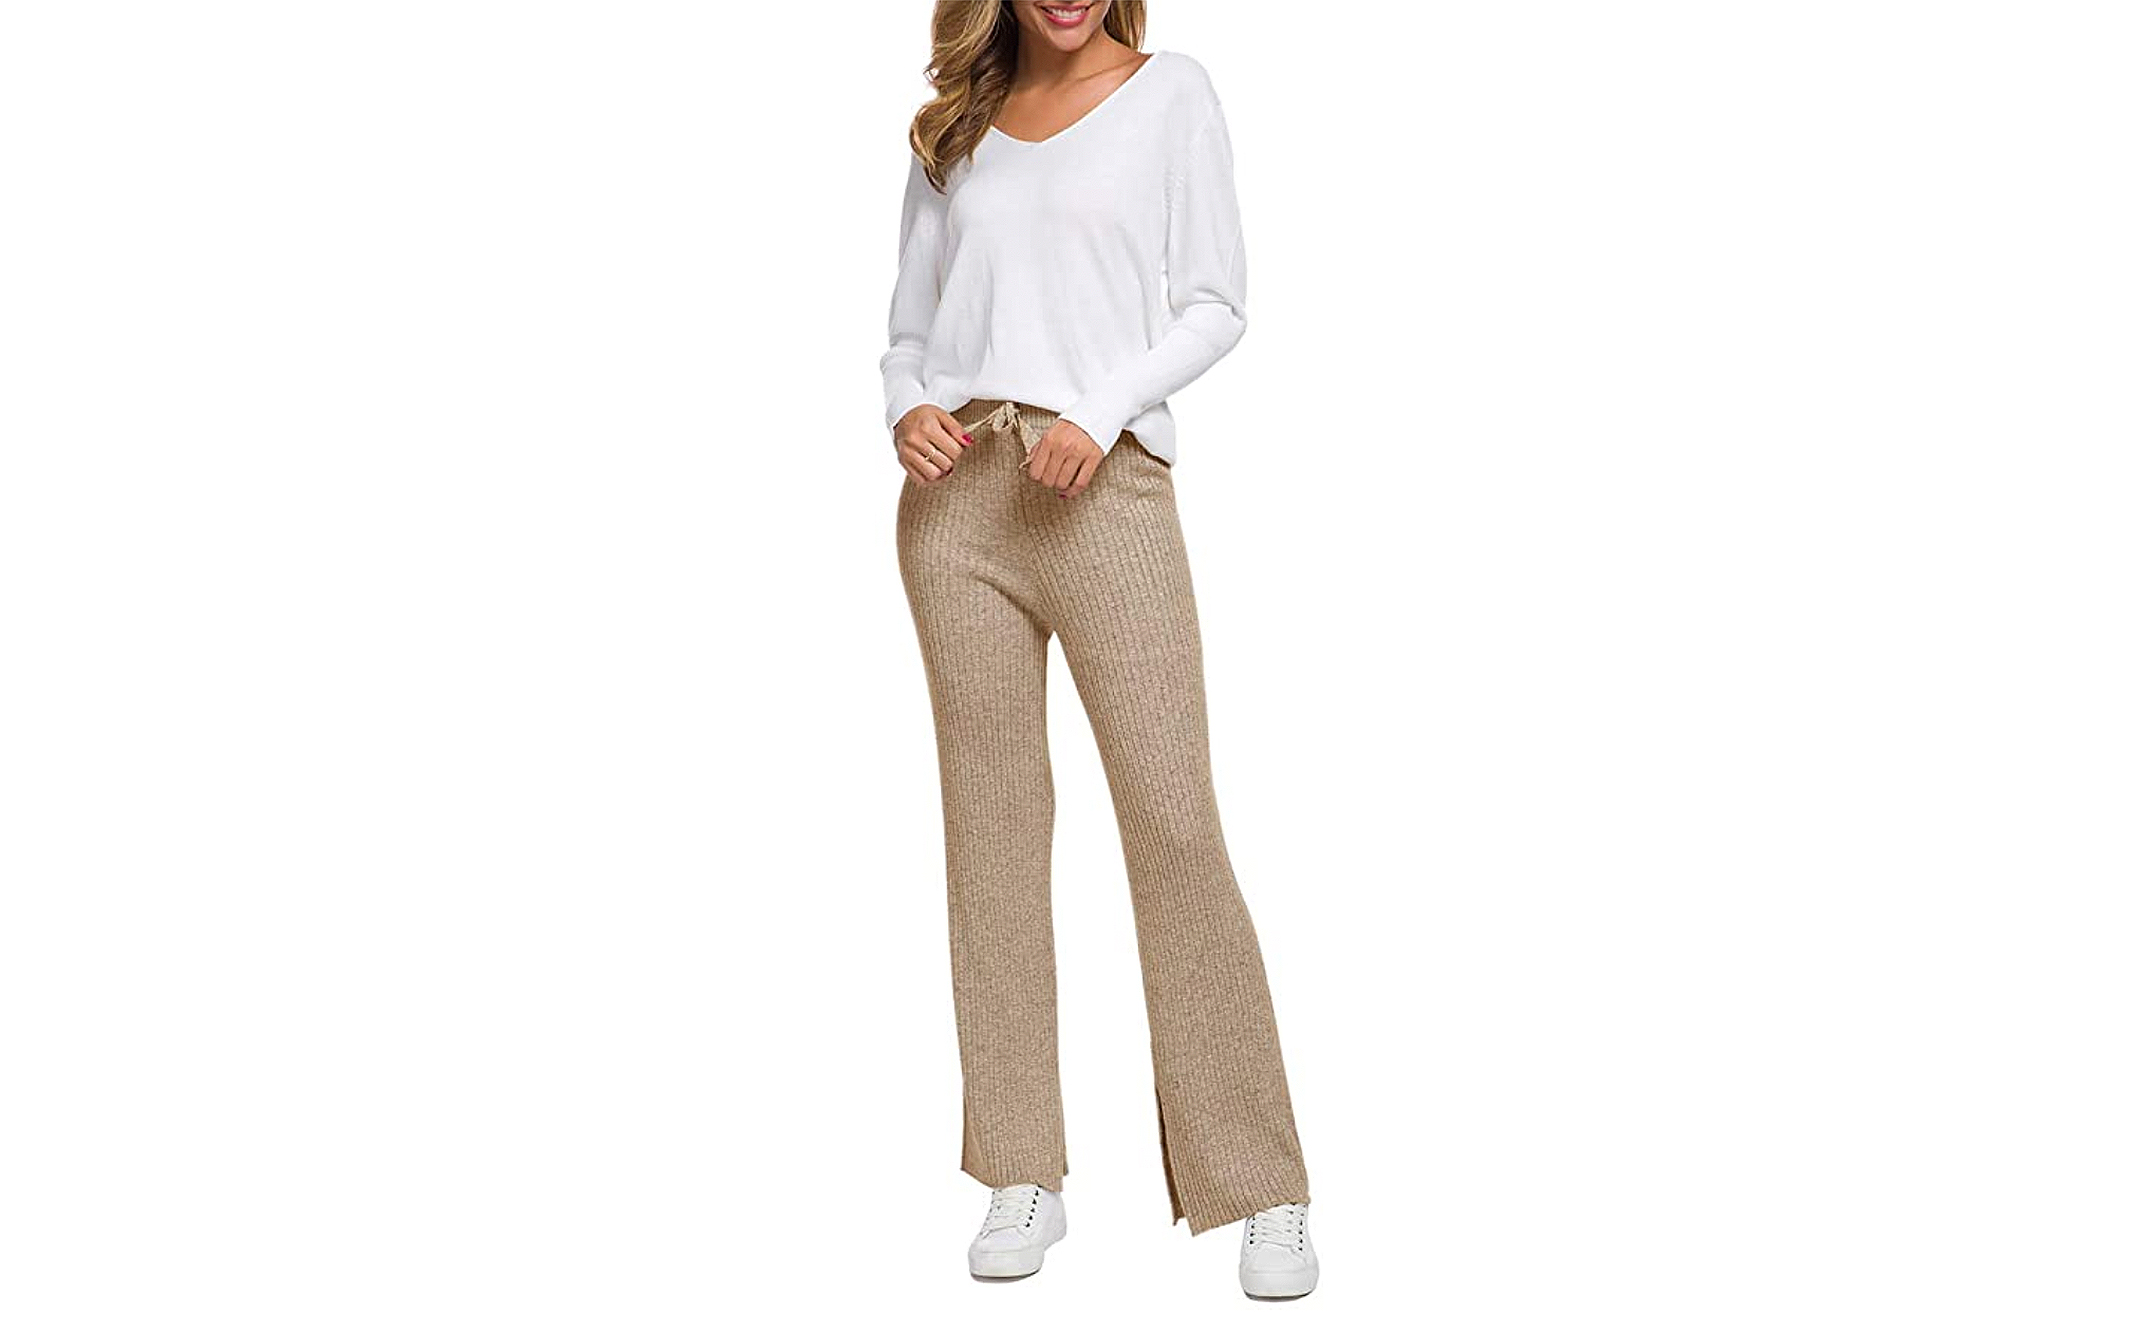 Buy Womens Cashmere Lounge Pants Online  Everyday Cashmere